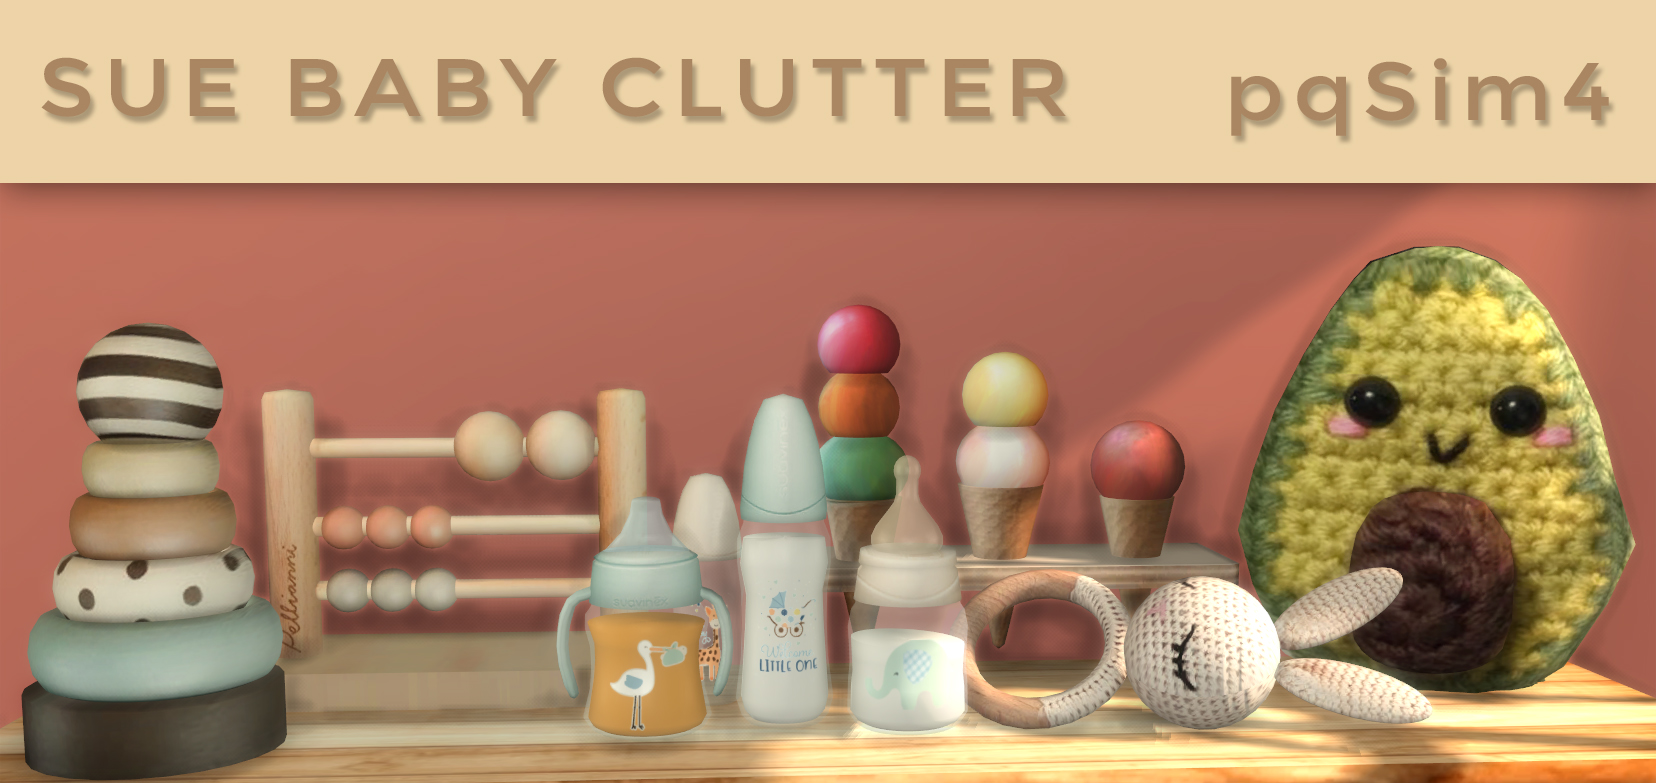 Sue Baby Clutter The Sims 4 Custom Content